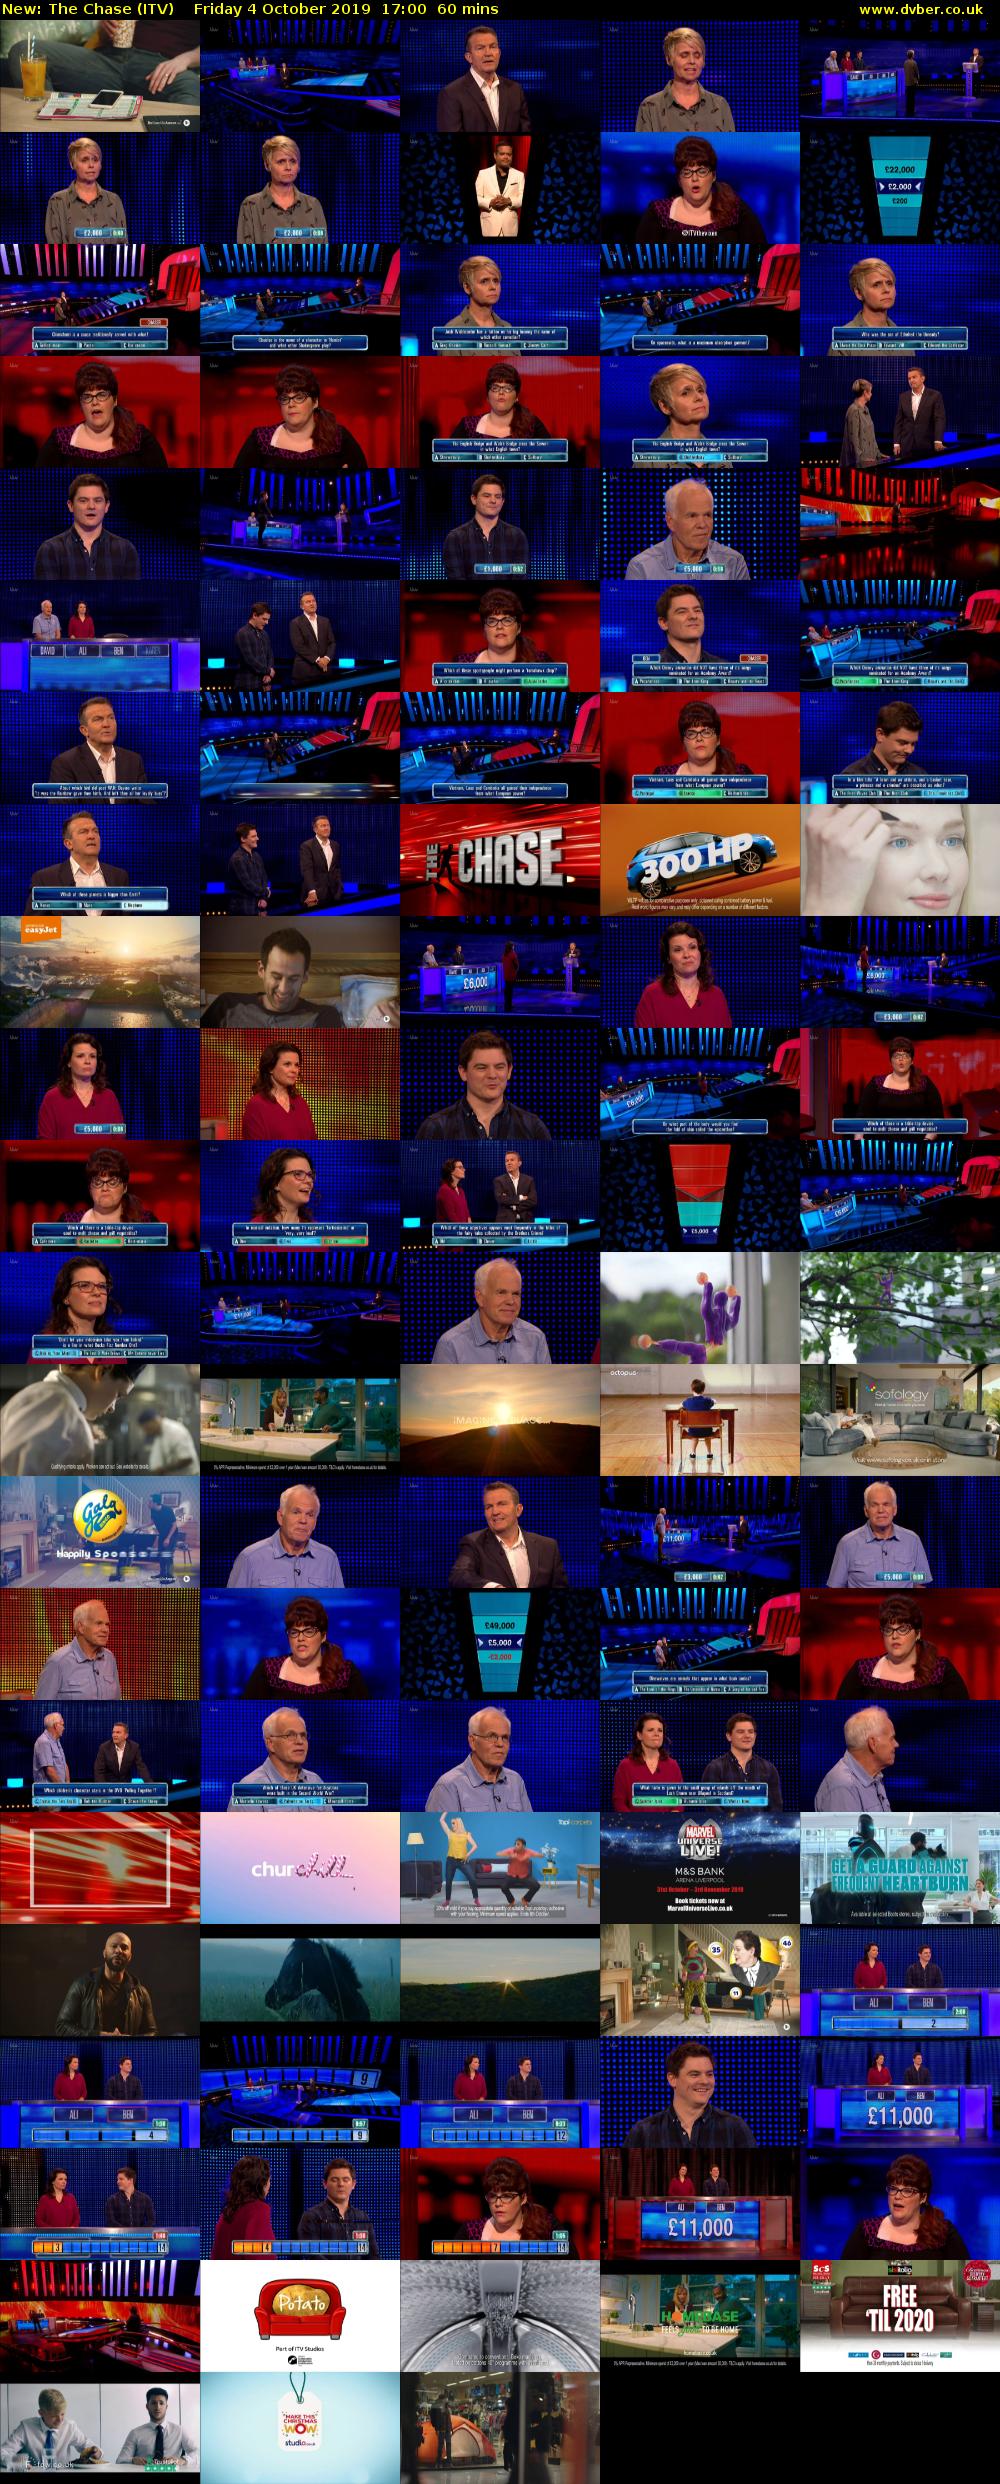 The Chase (ITV) Friday 4 October 2019 17:00 - 18:00